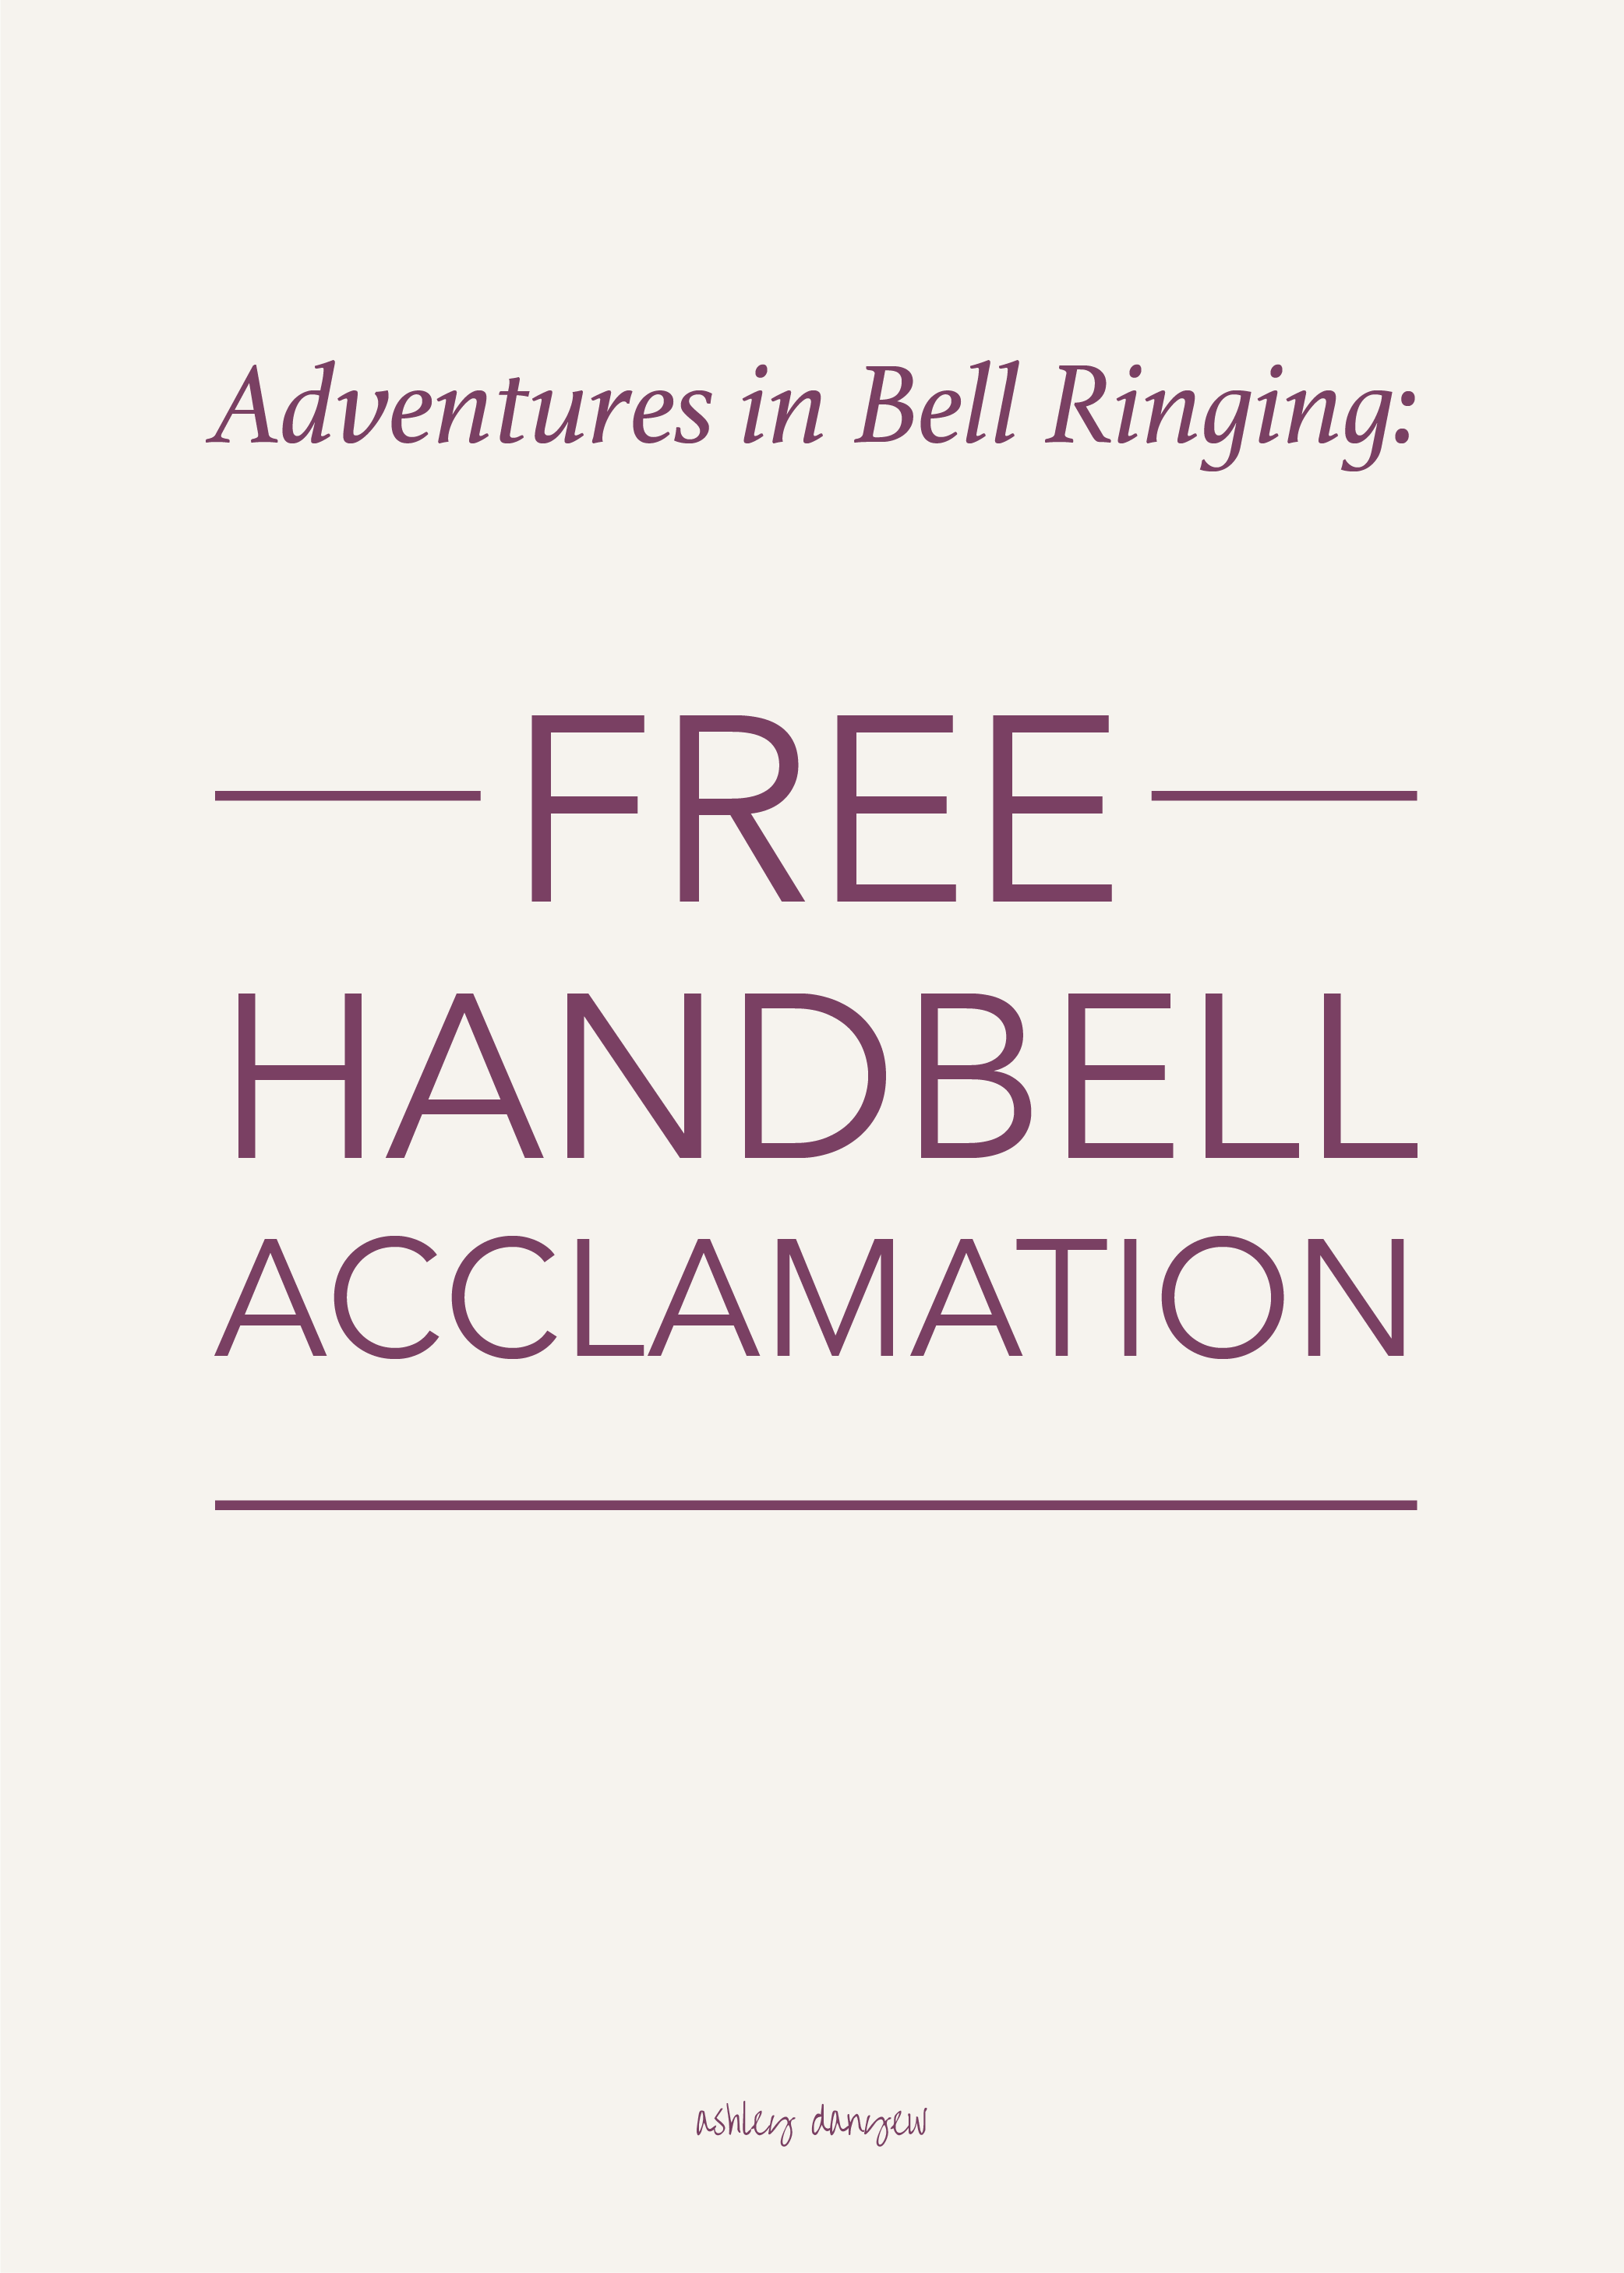 Copy of Adventures in Bell Ringing - Free Handbell Acclamation